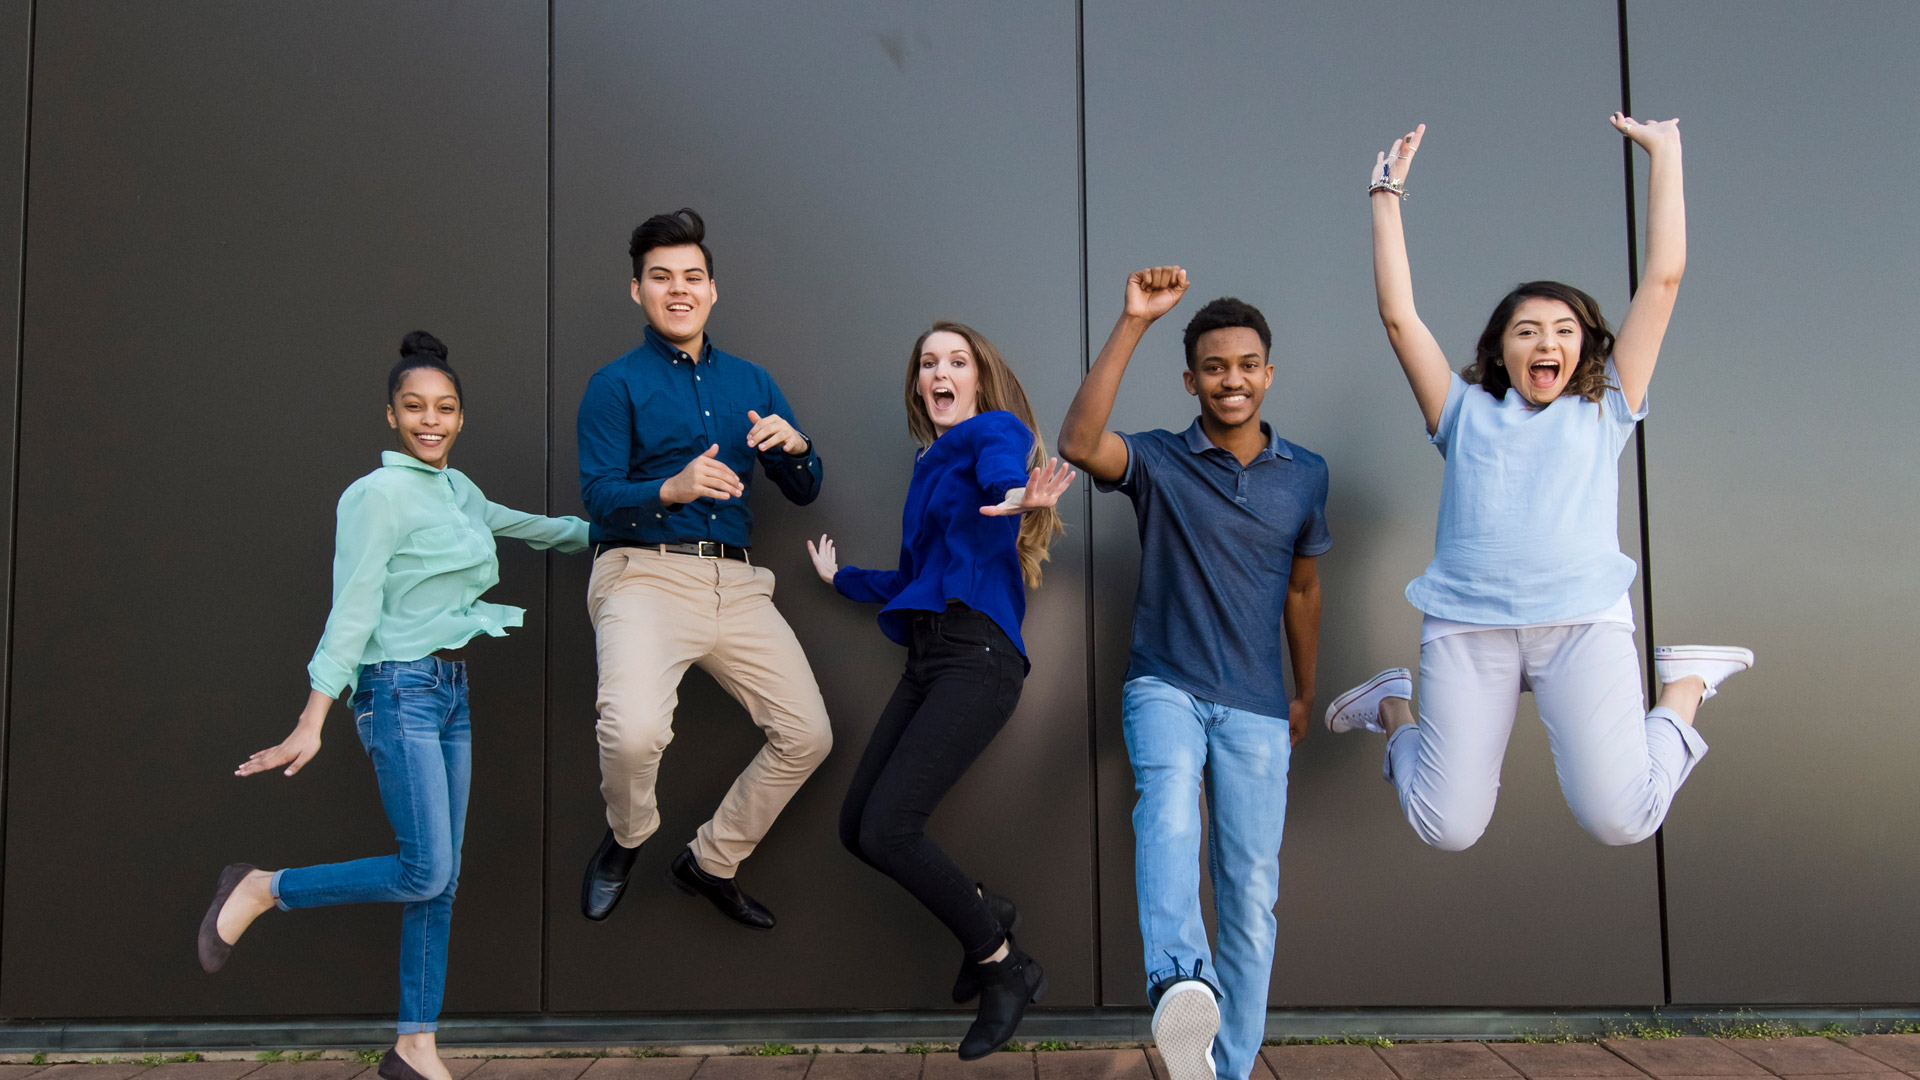 UHCL students leaping with excitement